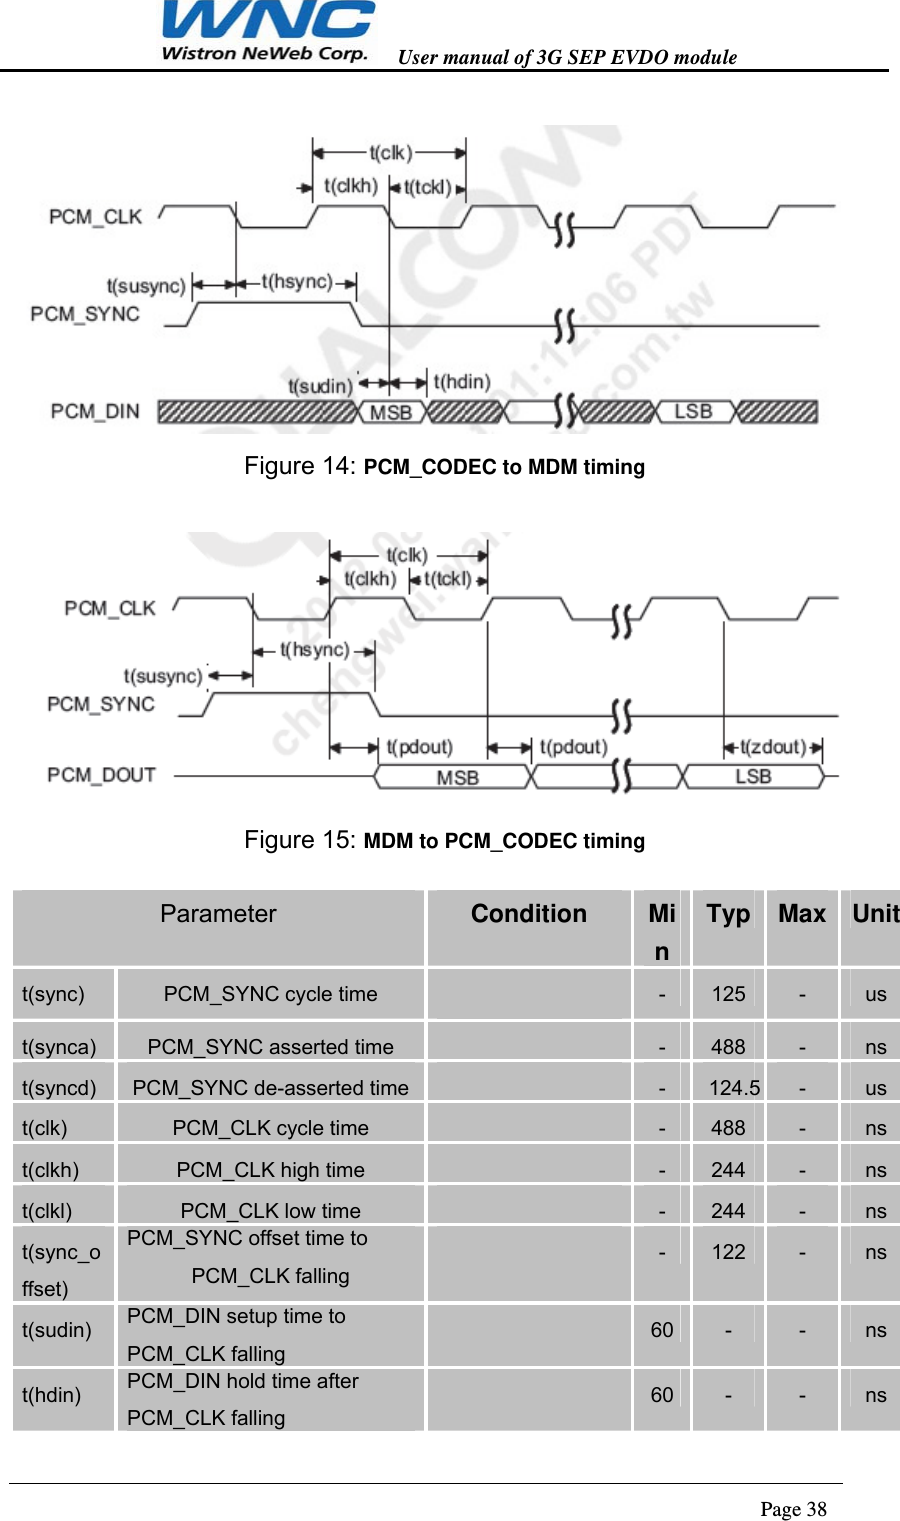   User manual of 3G SEP EVDO module                                                                      Page 38   Figure 14: PCM_CODEC to MDM timing   Figure 15: MDM to PCM_CODEC timing  Parameter  Condition MinTyp Max Unitt(sync)  PCM_SYNC cycle time   -  125  -  us t(synca)  PCM_SYNC asserted time   -  488  -  ns t(syncd)  PCM_SYNC de-asserted time  -  124.5  -  us t(clk)  PCM_CLK cycle time   -  488  -  ns t(clkh)  PCM_CLK high time   -  244  -  ns t(clkl)  PCM_CLK low time   -  244  -  ns t(sync_offset) PCM_SYNC offset time to PCM_CLK falling  -  122  -  ns t(sudin)  PCM_DIN setup time to PCM_CLK falling  60 -  -  ns t(hdin)  PCM_DIN hold time after PCM_CLK falling  60 -  -  ns 